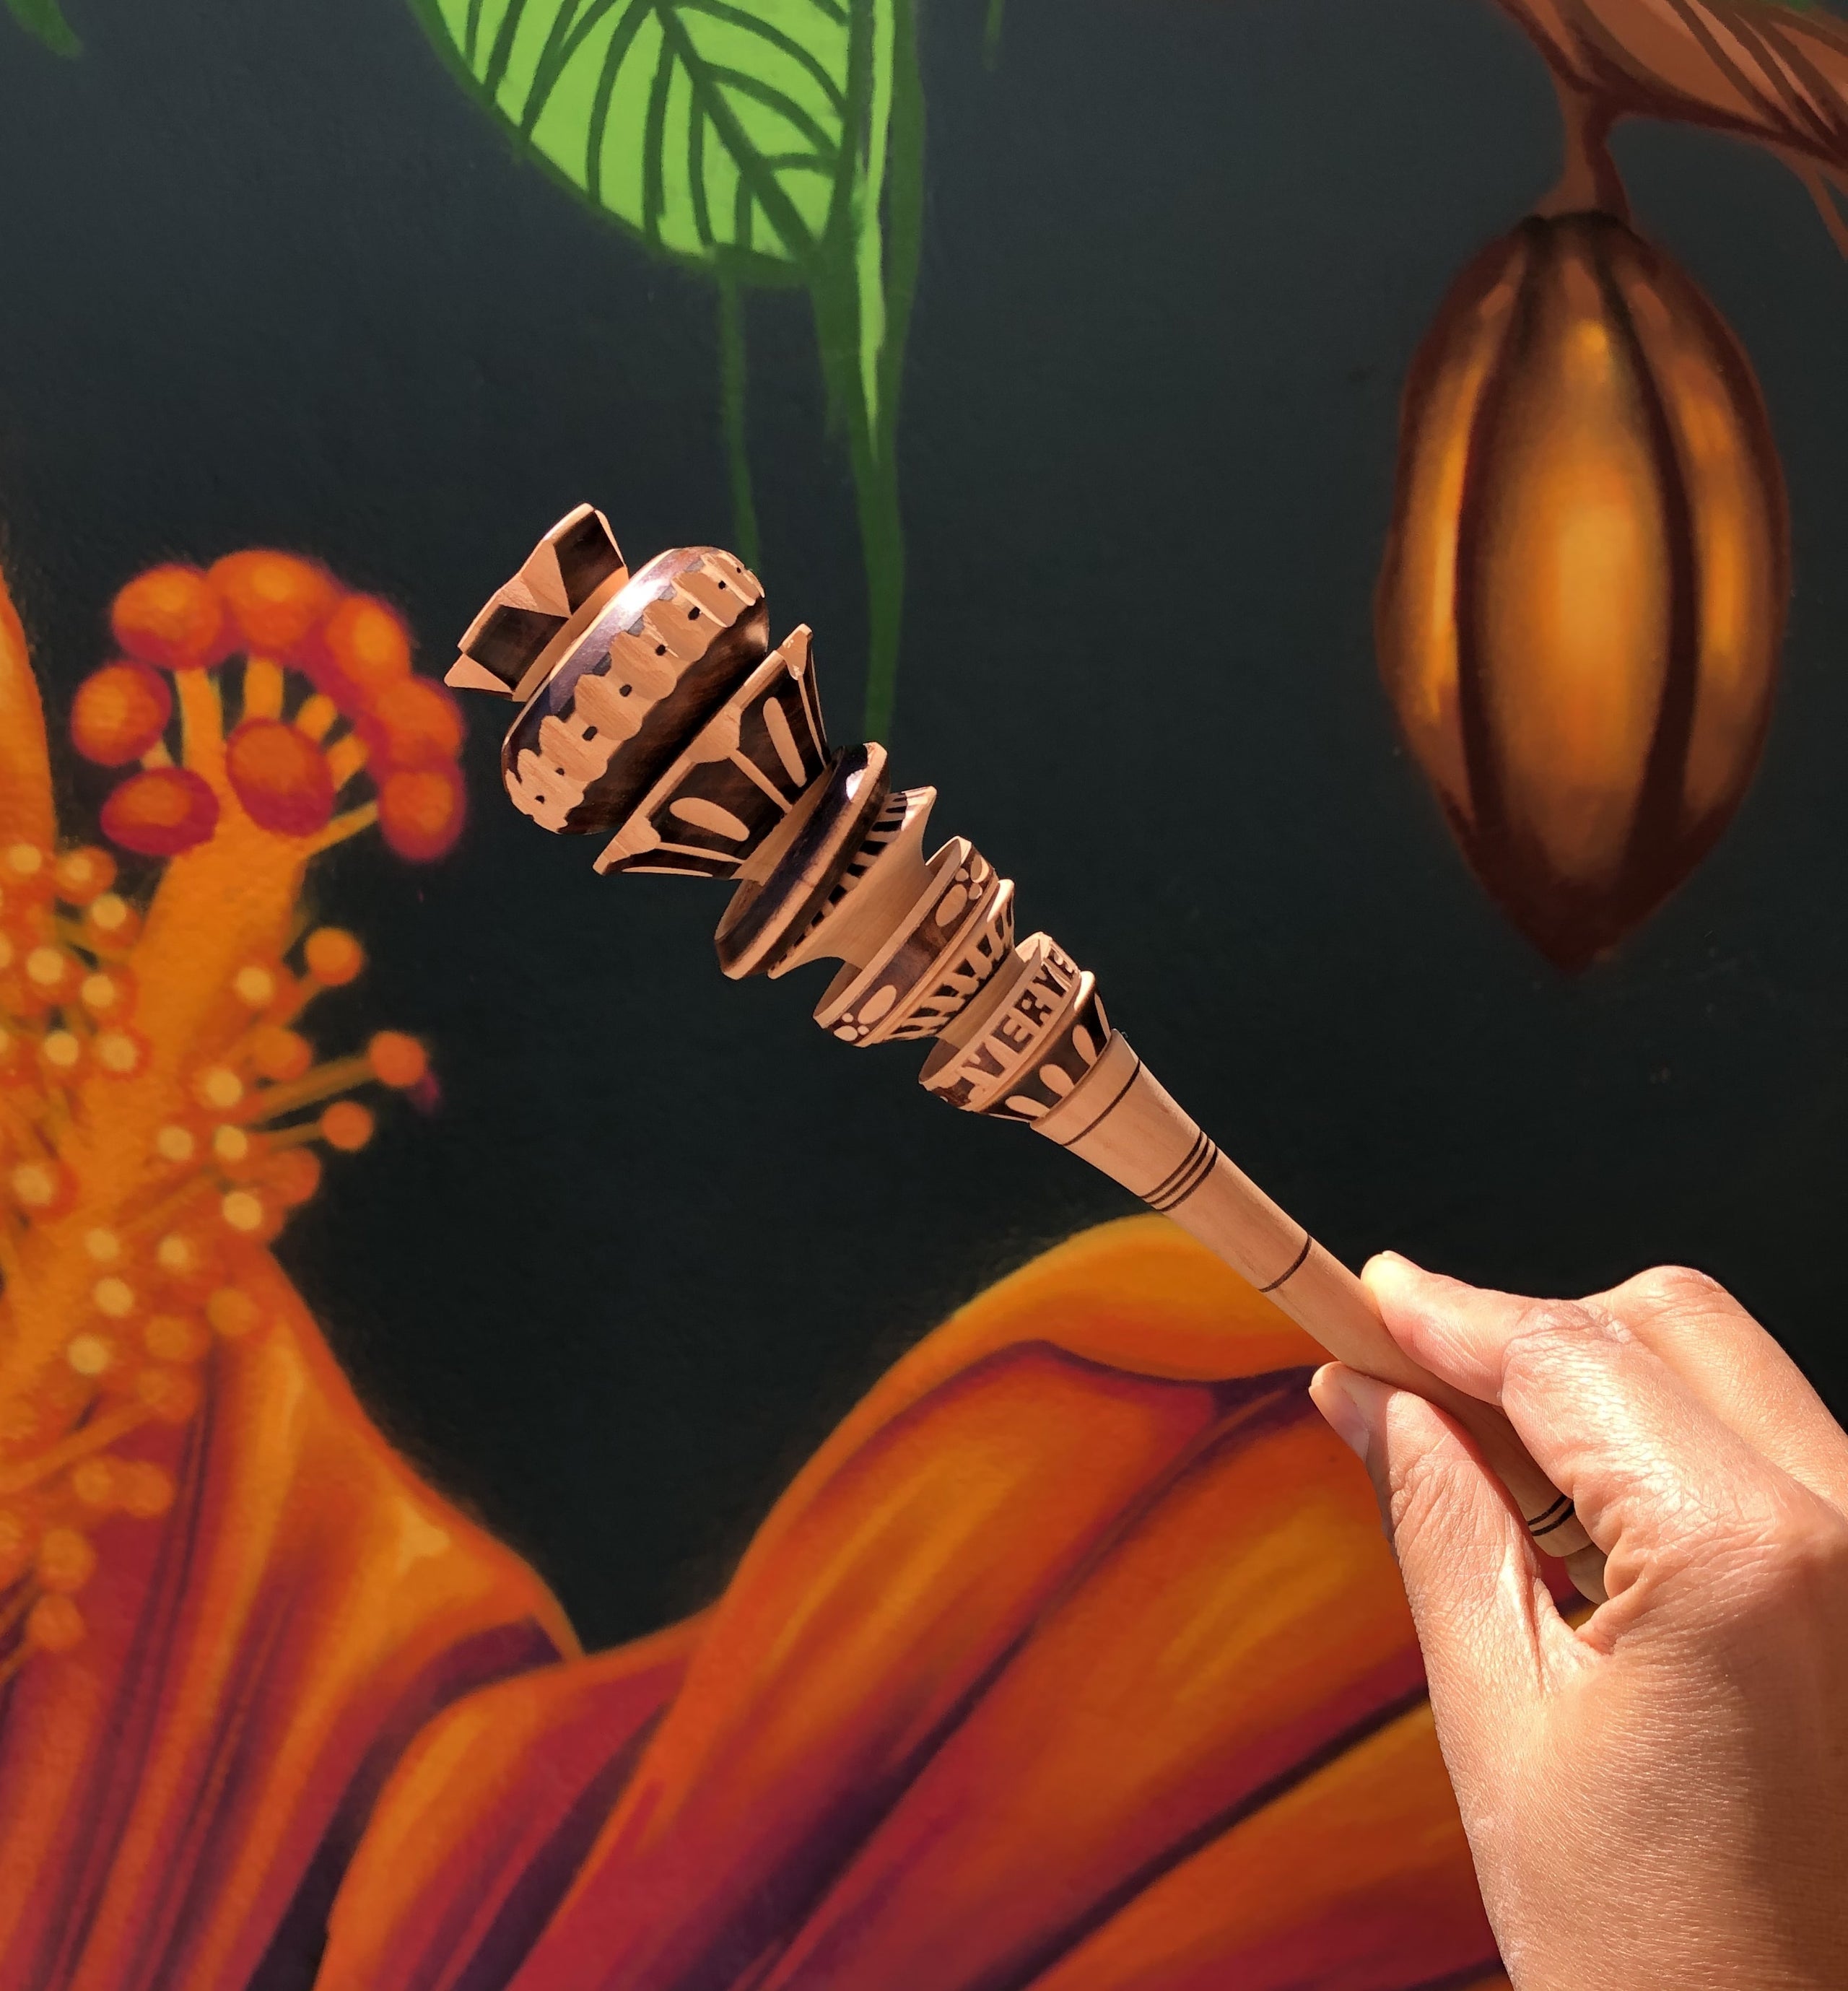 Molinillo - Hand Carved Mexican Hot Chocolate Frother